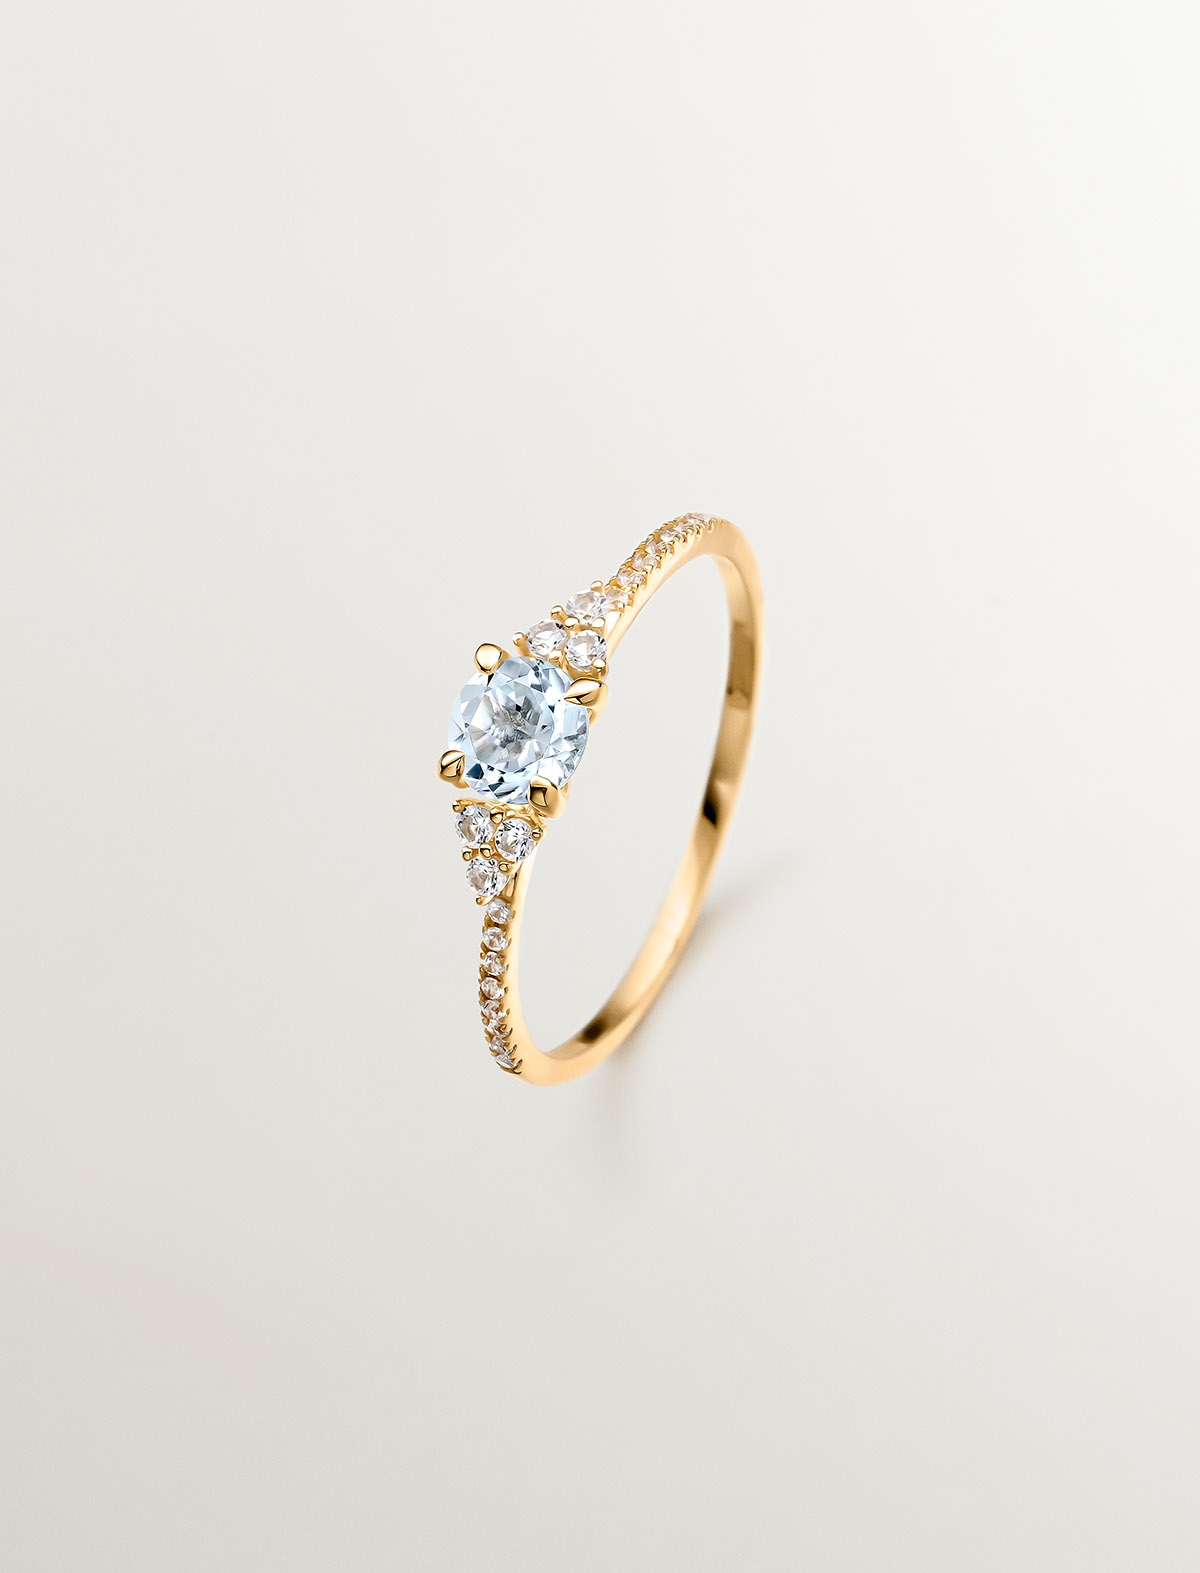 925 Silver ring bathed in 18K yellow gold with sky blue topaz and white sapphires.